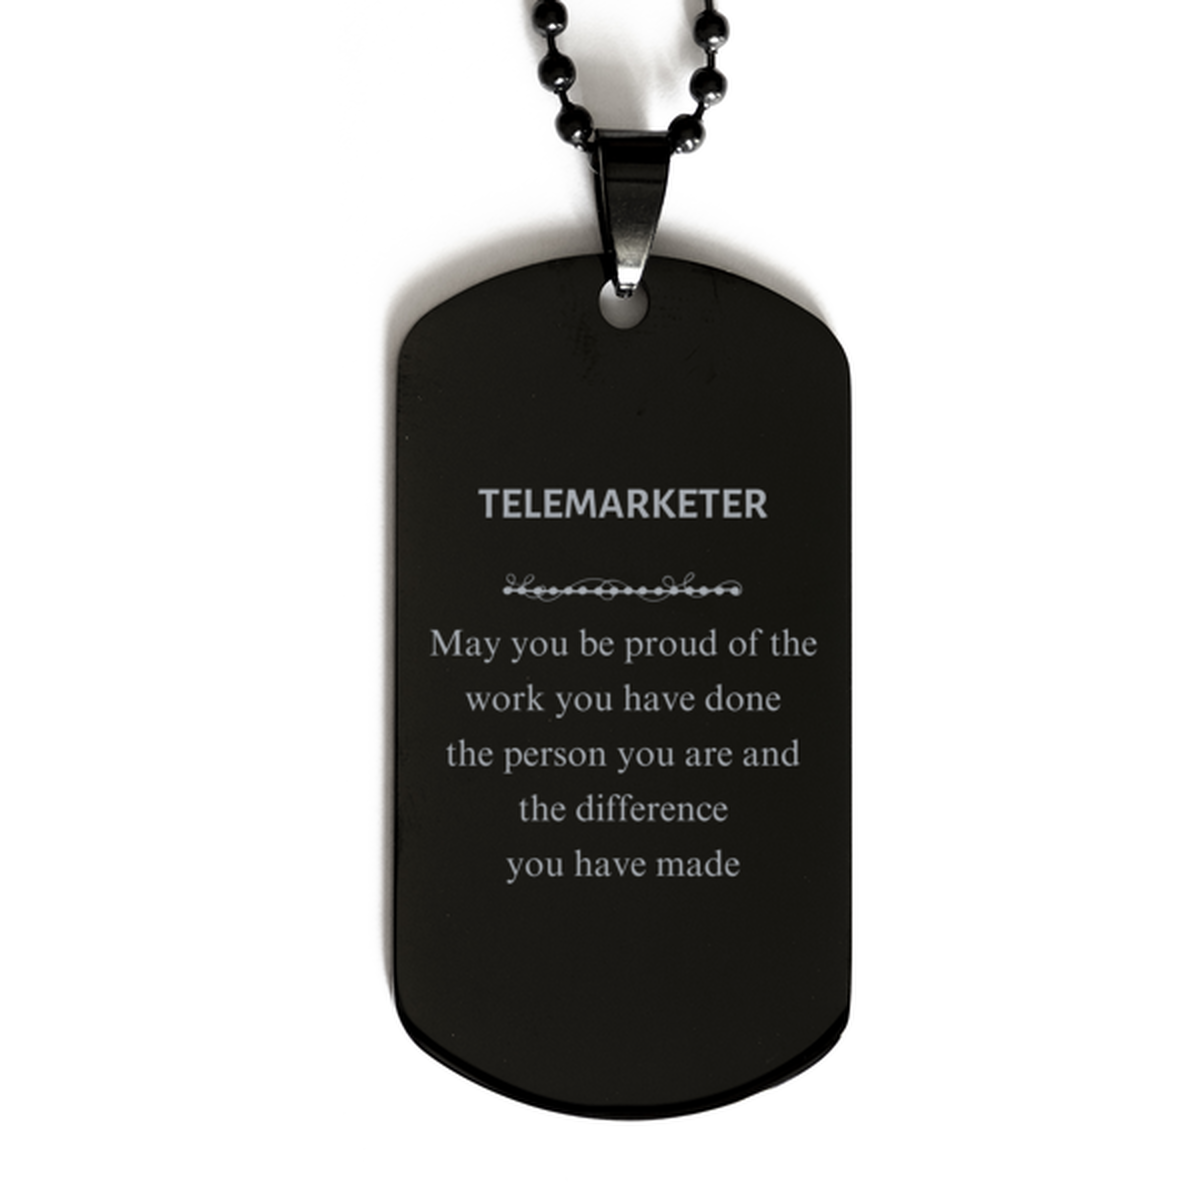 Telemarketer May you be proud of the work you have done, Retirement Telemarketer Black Dog Tag for Colleague Appreciation Gifts Amazing for Telemarketer